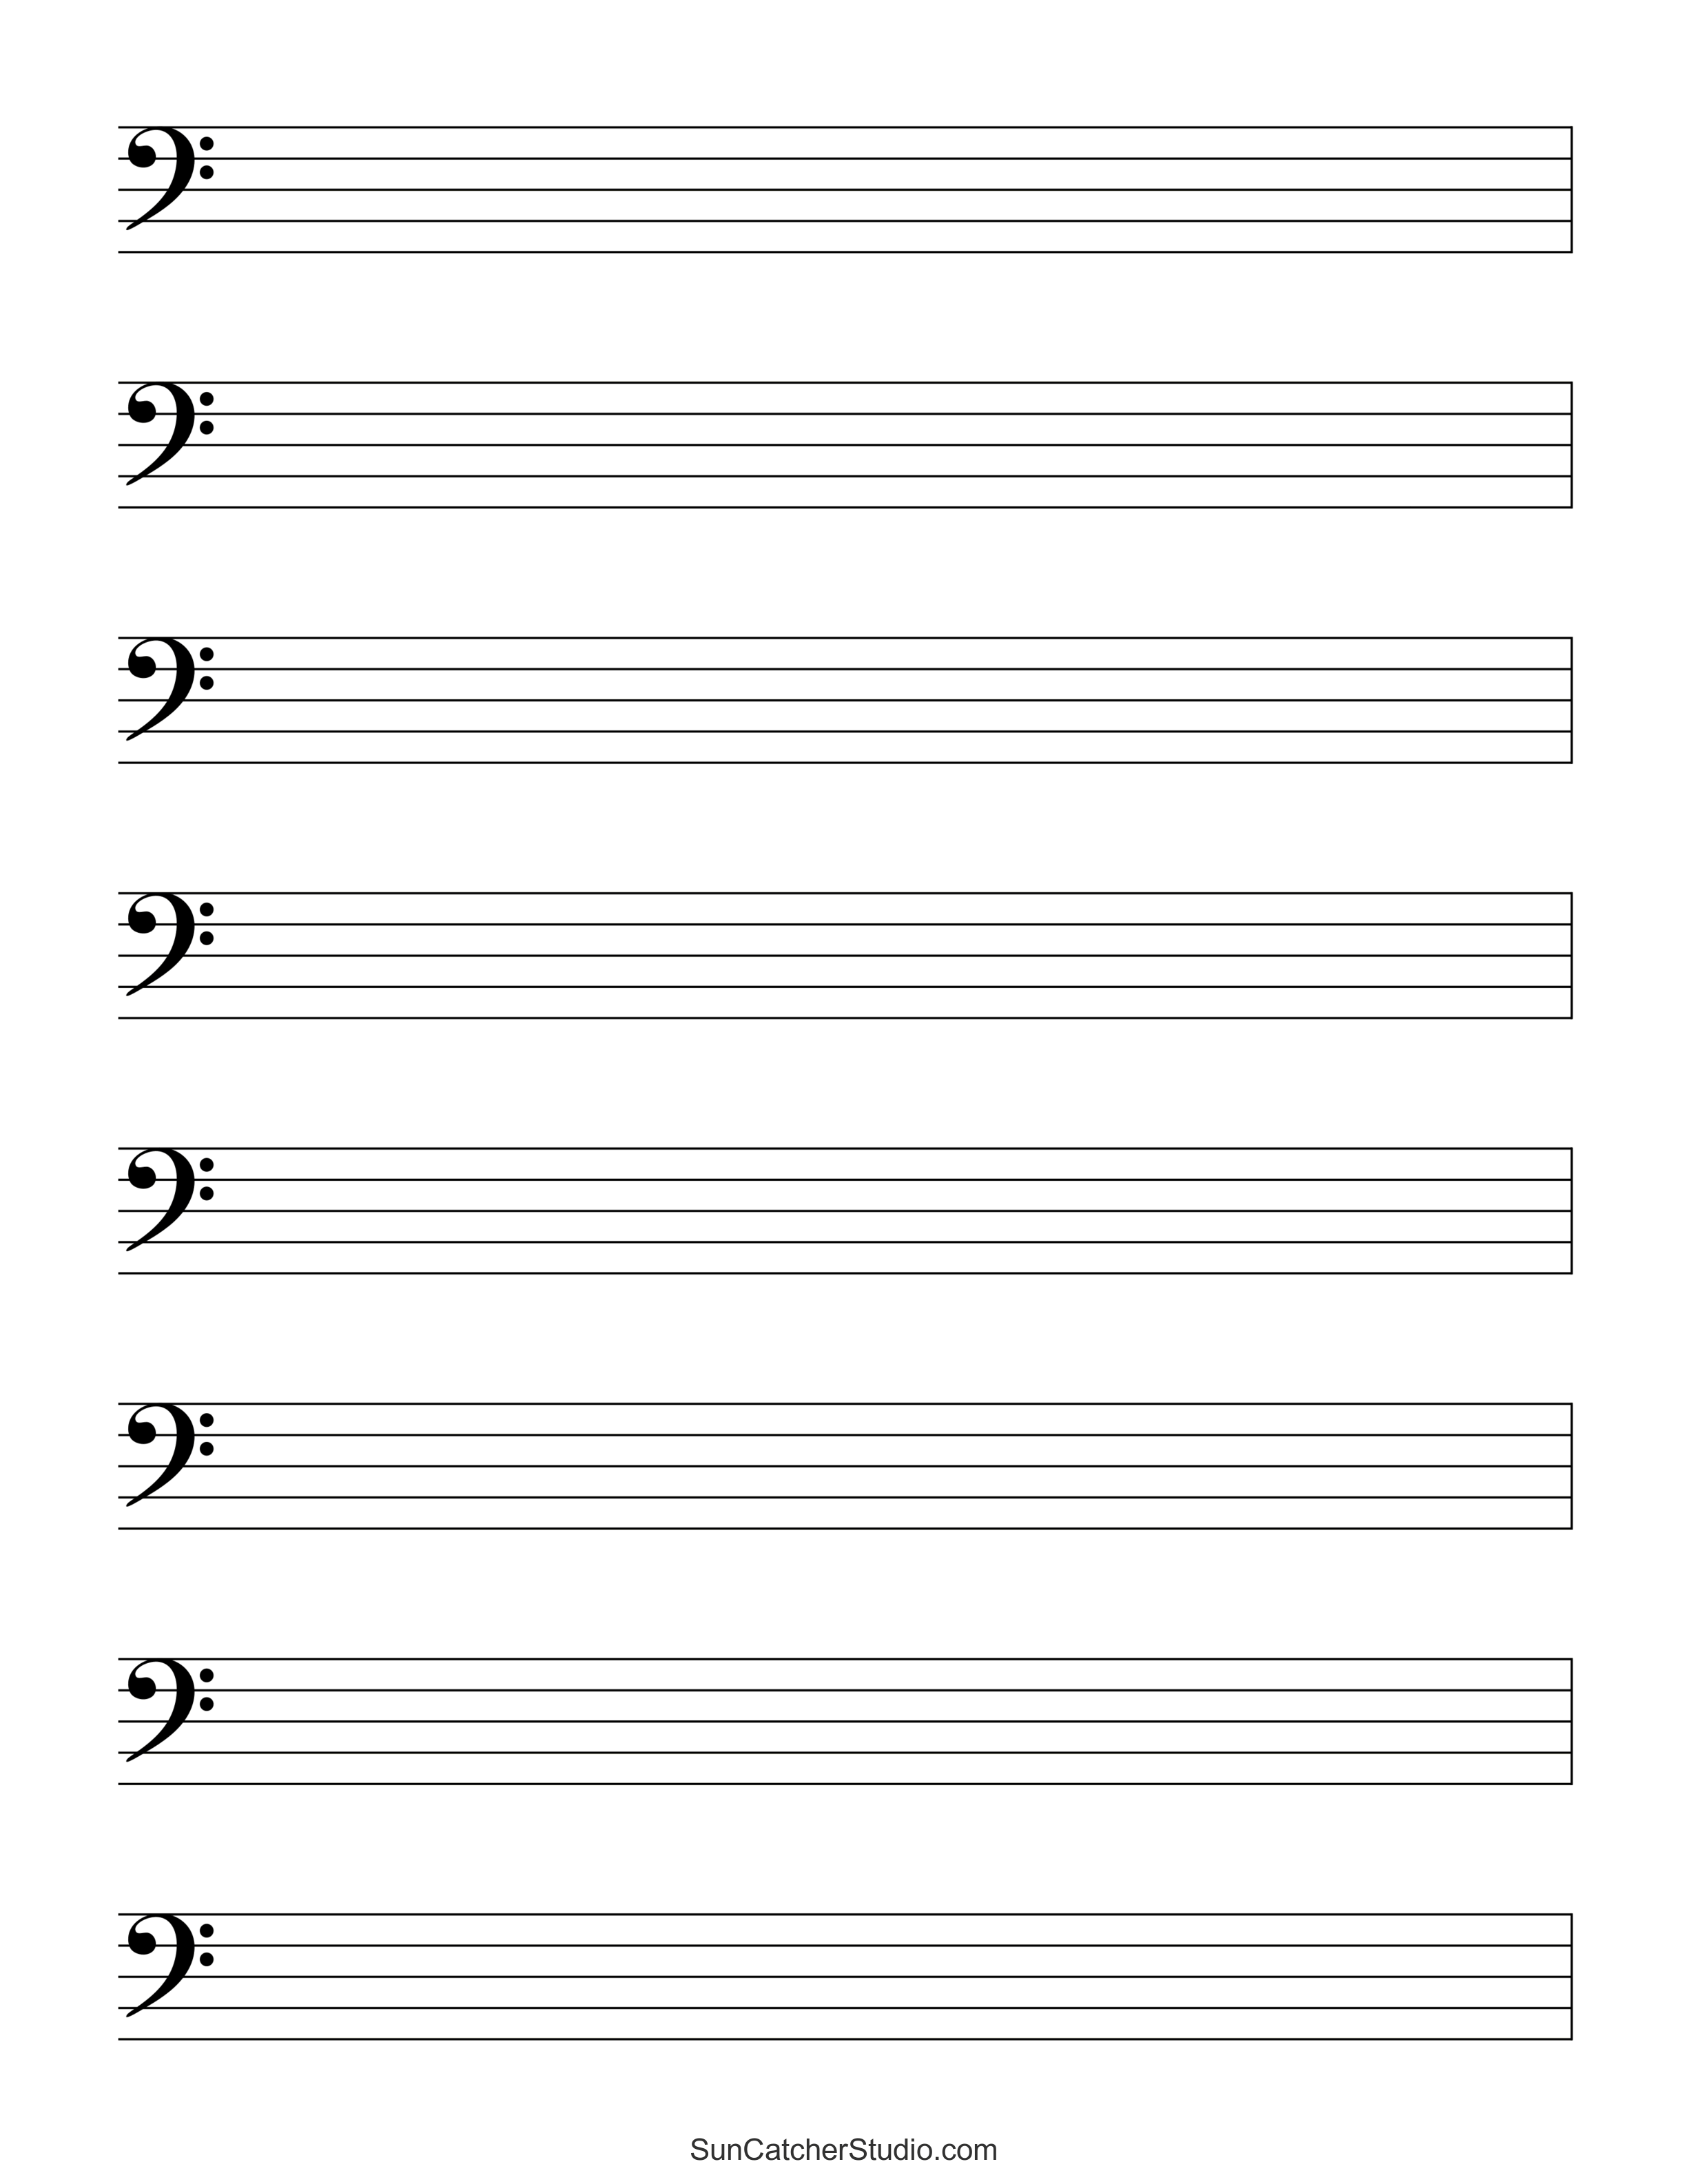 Blank 8 Stave Music Sheet 0519